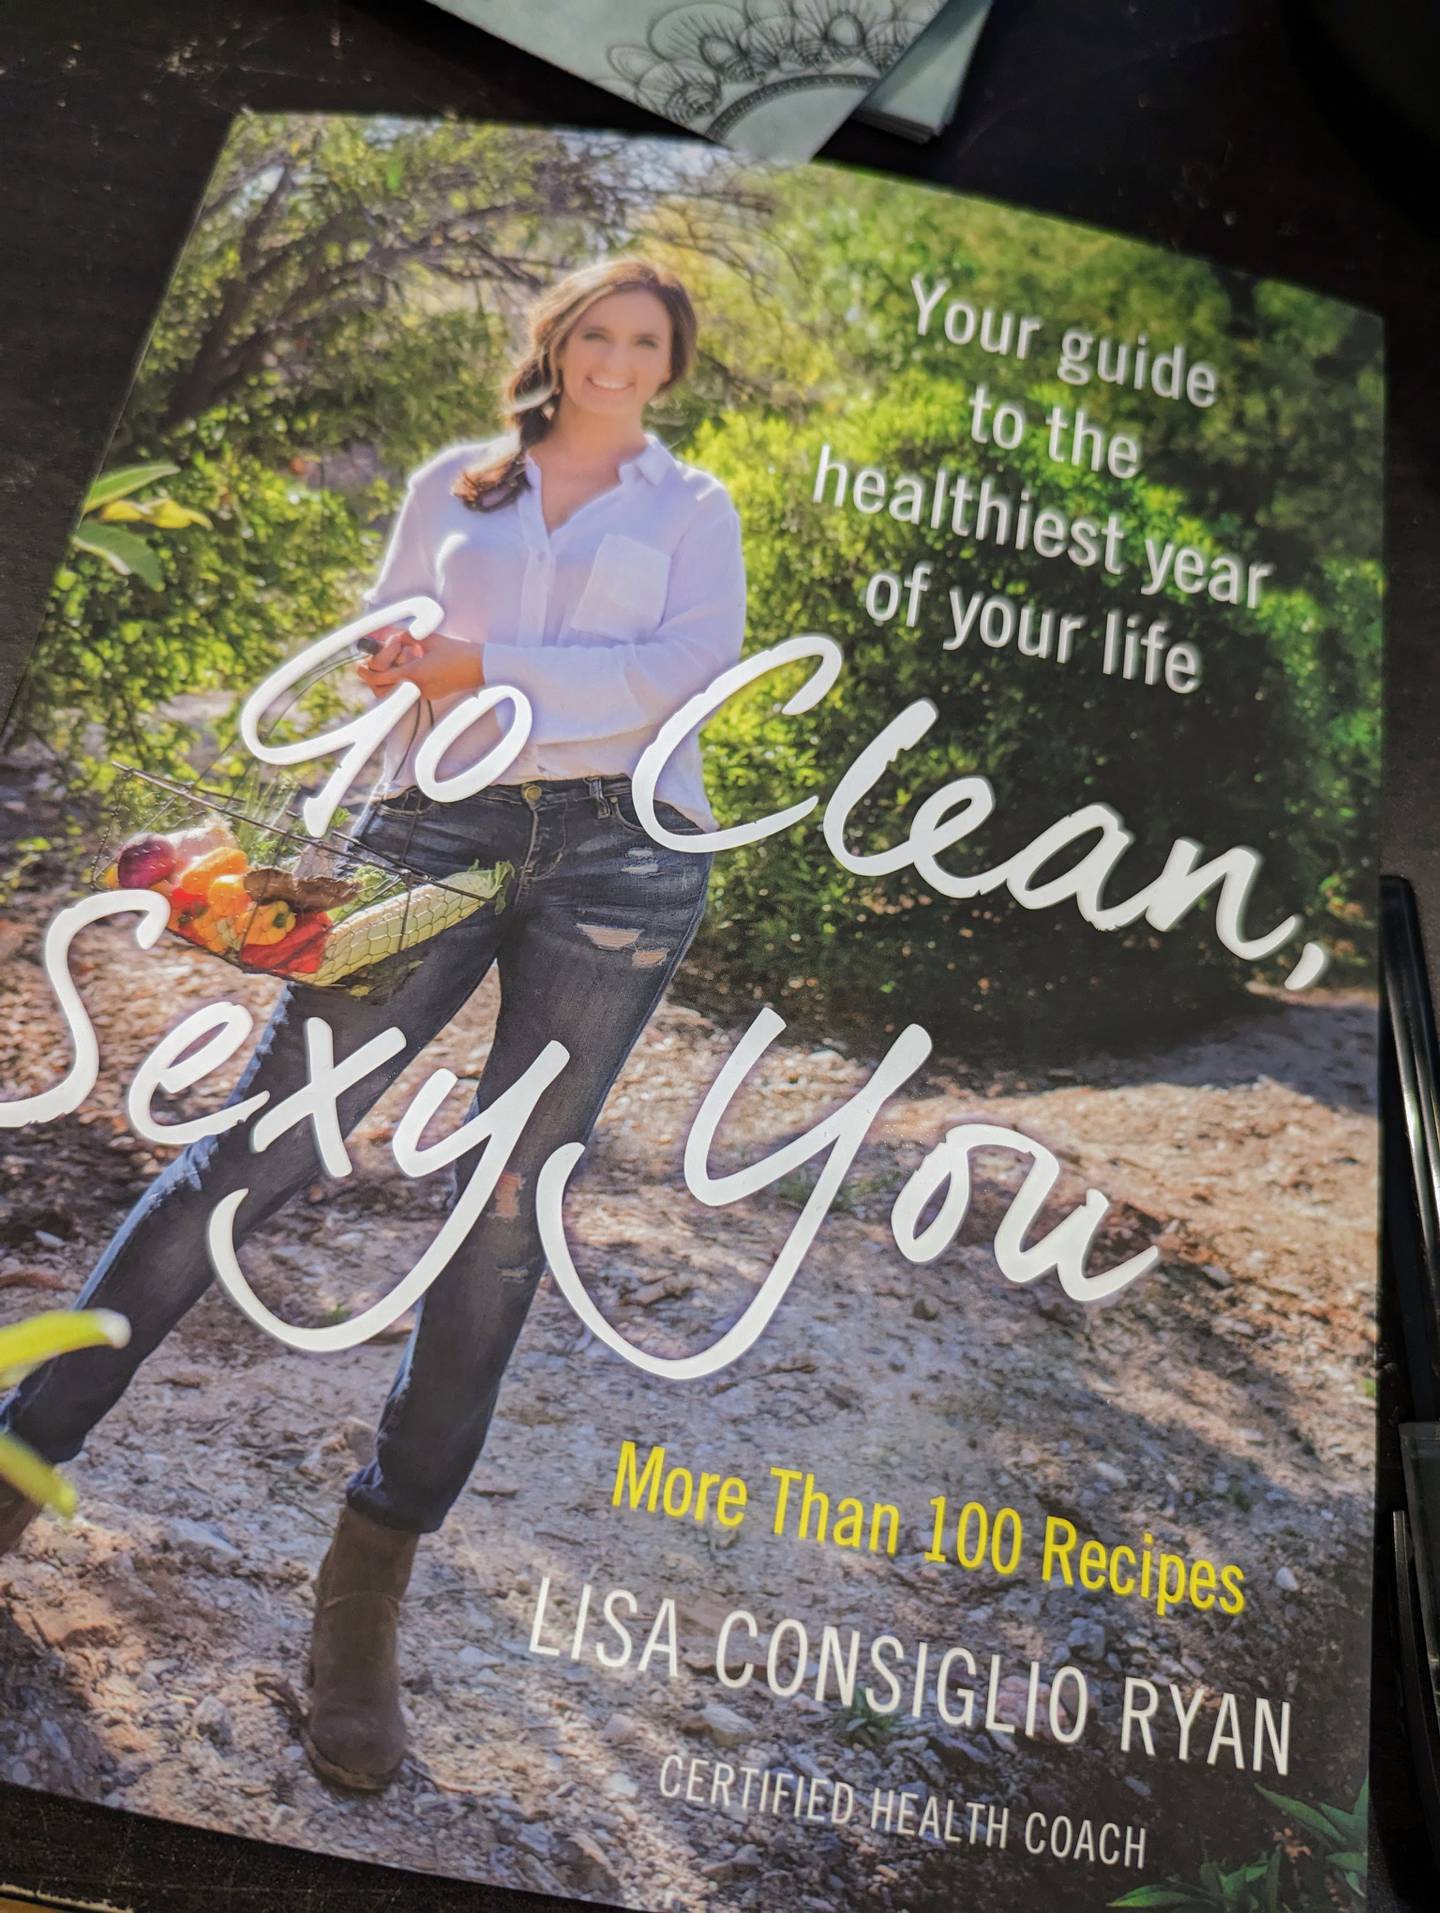 Lisa Consiglio Ryan's best-selling 2016 book "Go Clean Sexy You" offers straightforward advice on cleansing and then maintaining a balanced, healthy diet.